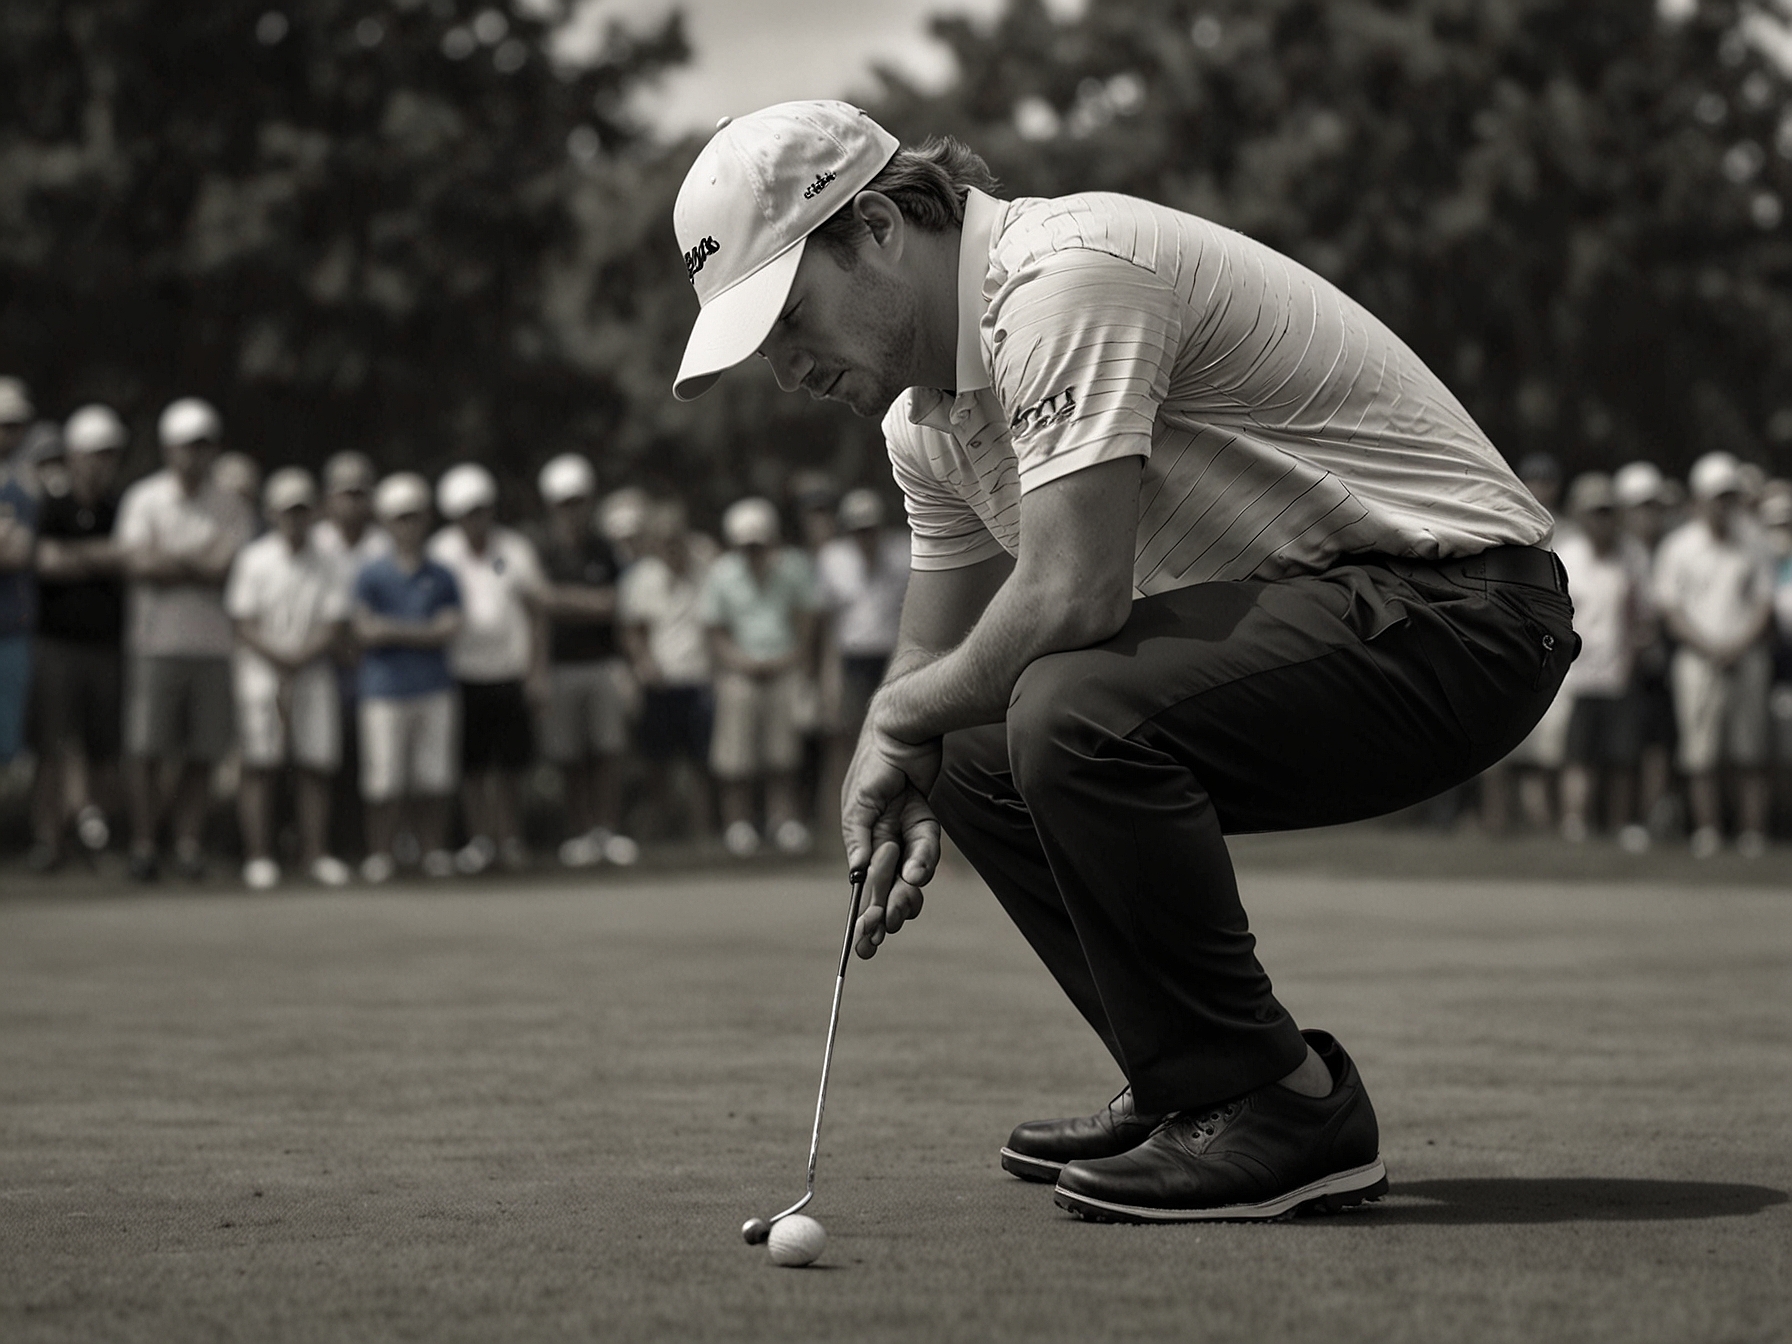 Sam Burns in action at the U.S. Open, showcasing his exceptional putting skills with a focused expression as he lines up a shot, epitomizing his precision and poise.